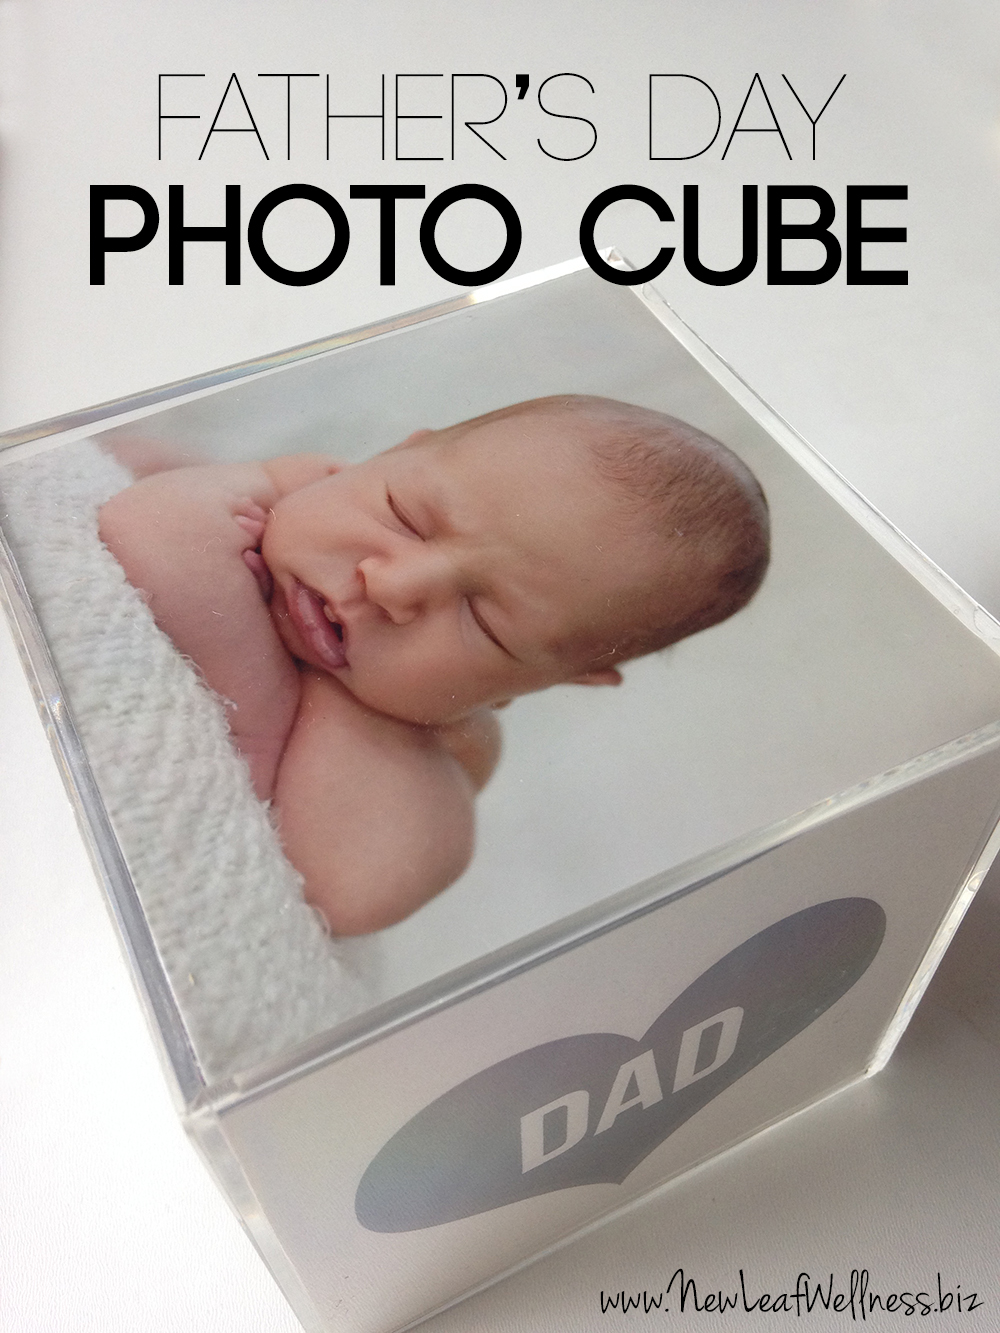 Last minute Father's Day photo cube diy